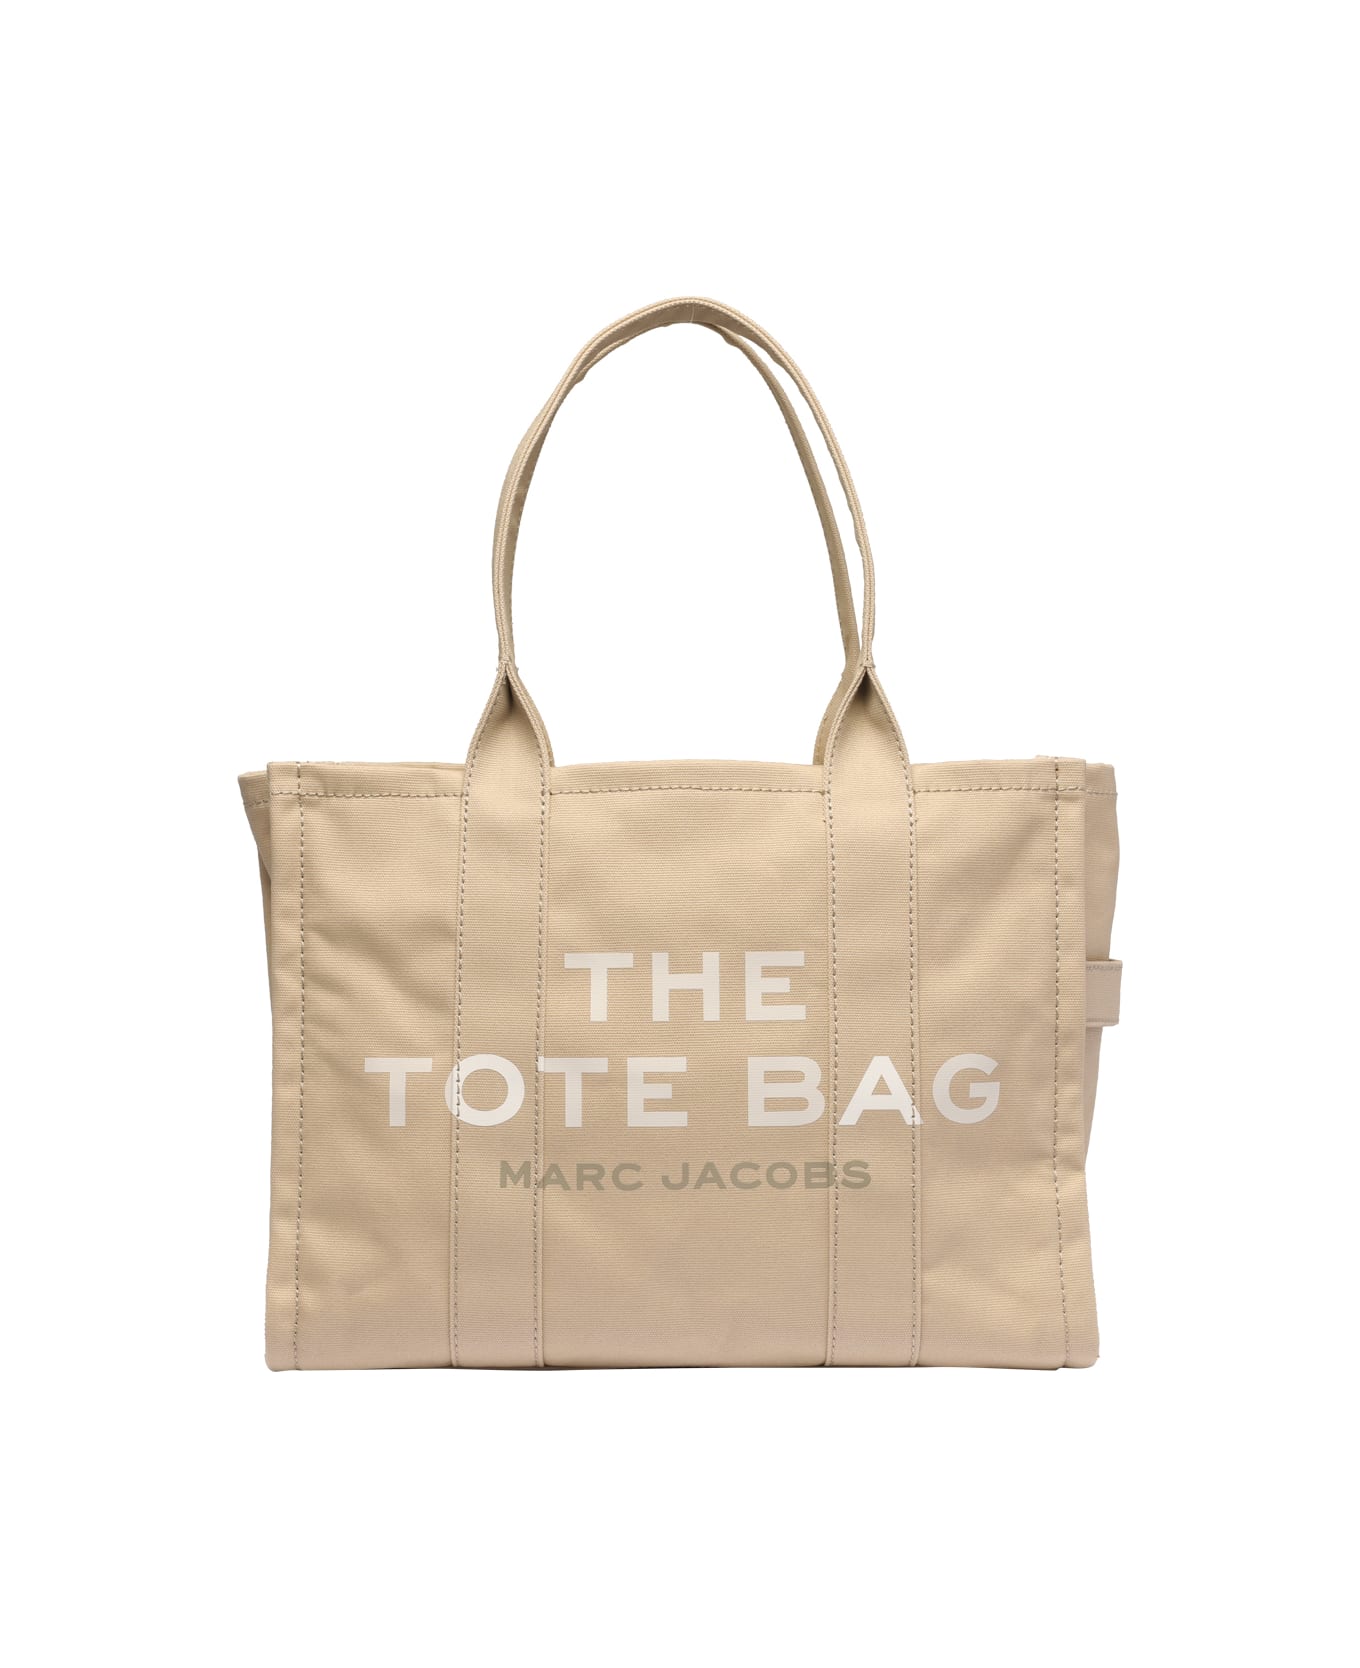 Marc Jacobs The Tote Large Bag - Beige トートバッグ